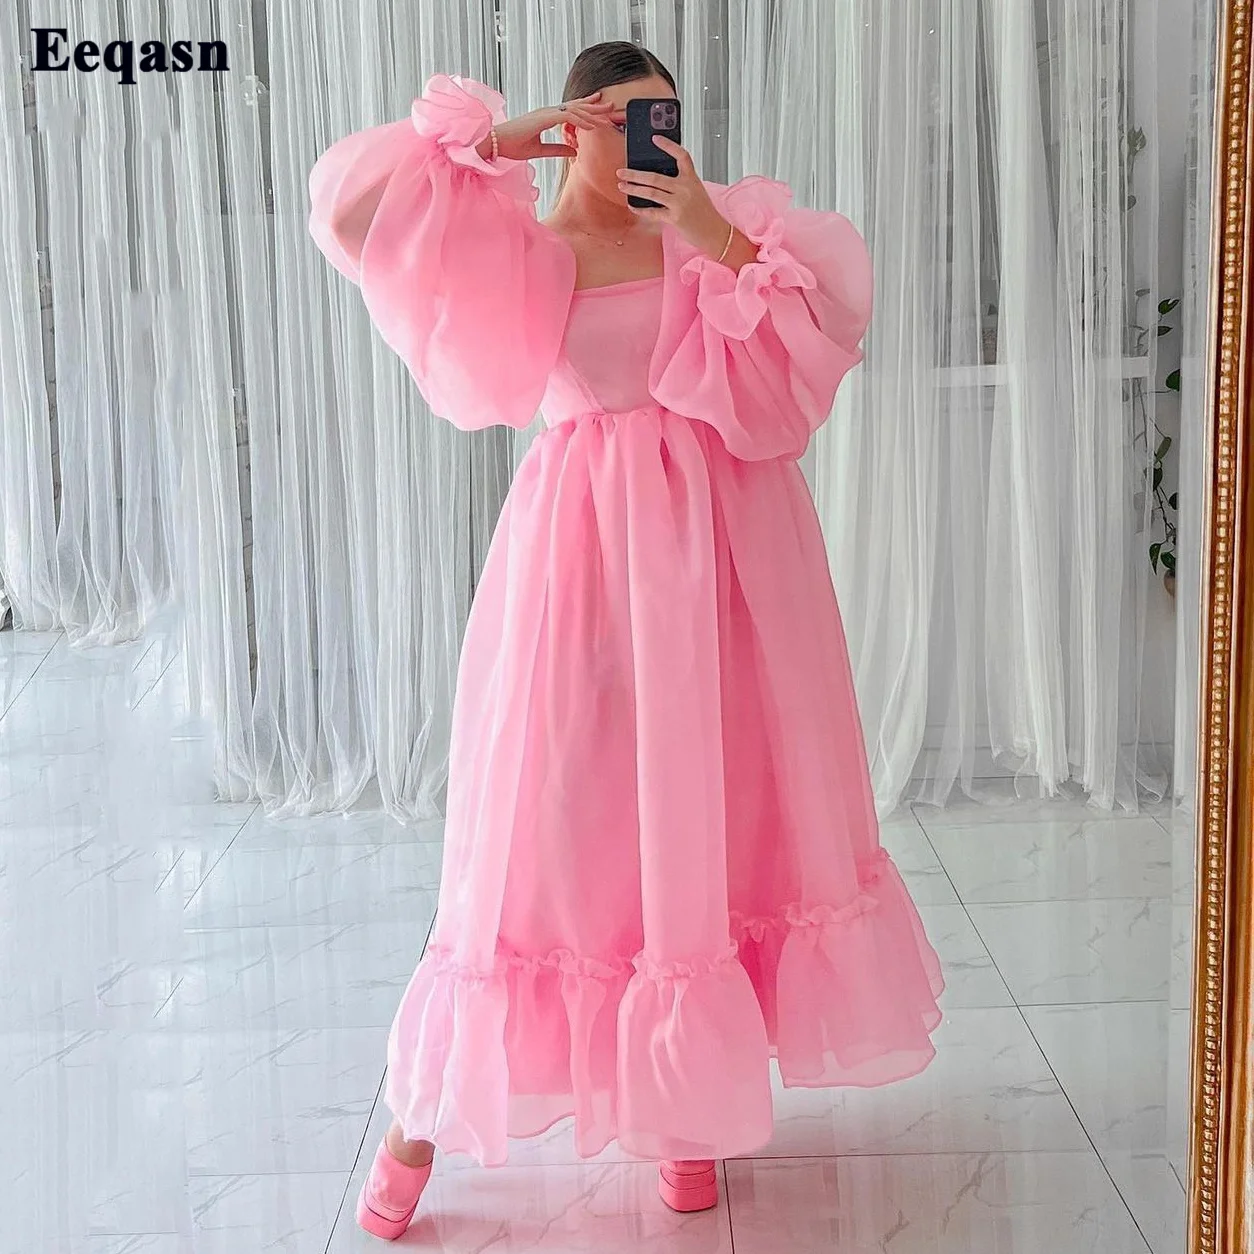 Pink Organza Midi Women Prom Dresses Long Sleeves Ankle Length Homcoming Party Dress Formal Evening Gowns Fashion Club Outfits